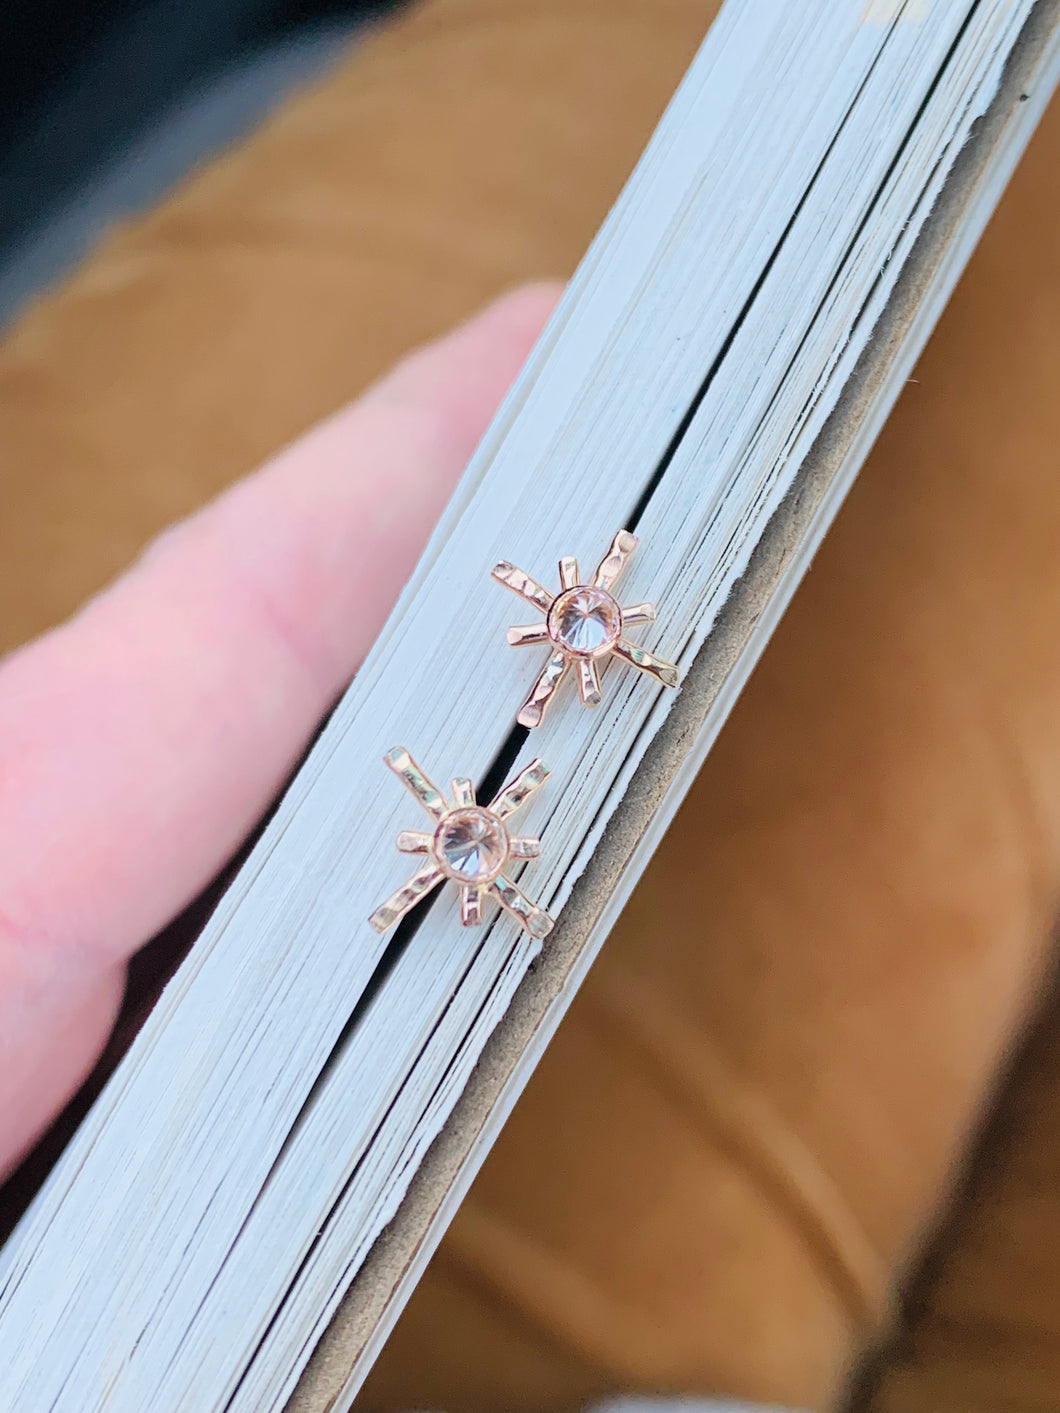 14k Gold Fill Star Crossed Lover Earrings tucked into the edge of a book. Gold Starburst Stud earrings have Cubic Zirconia centers.